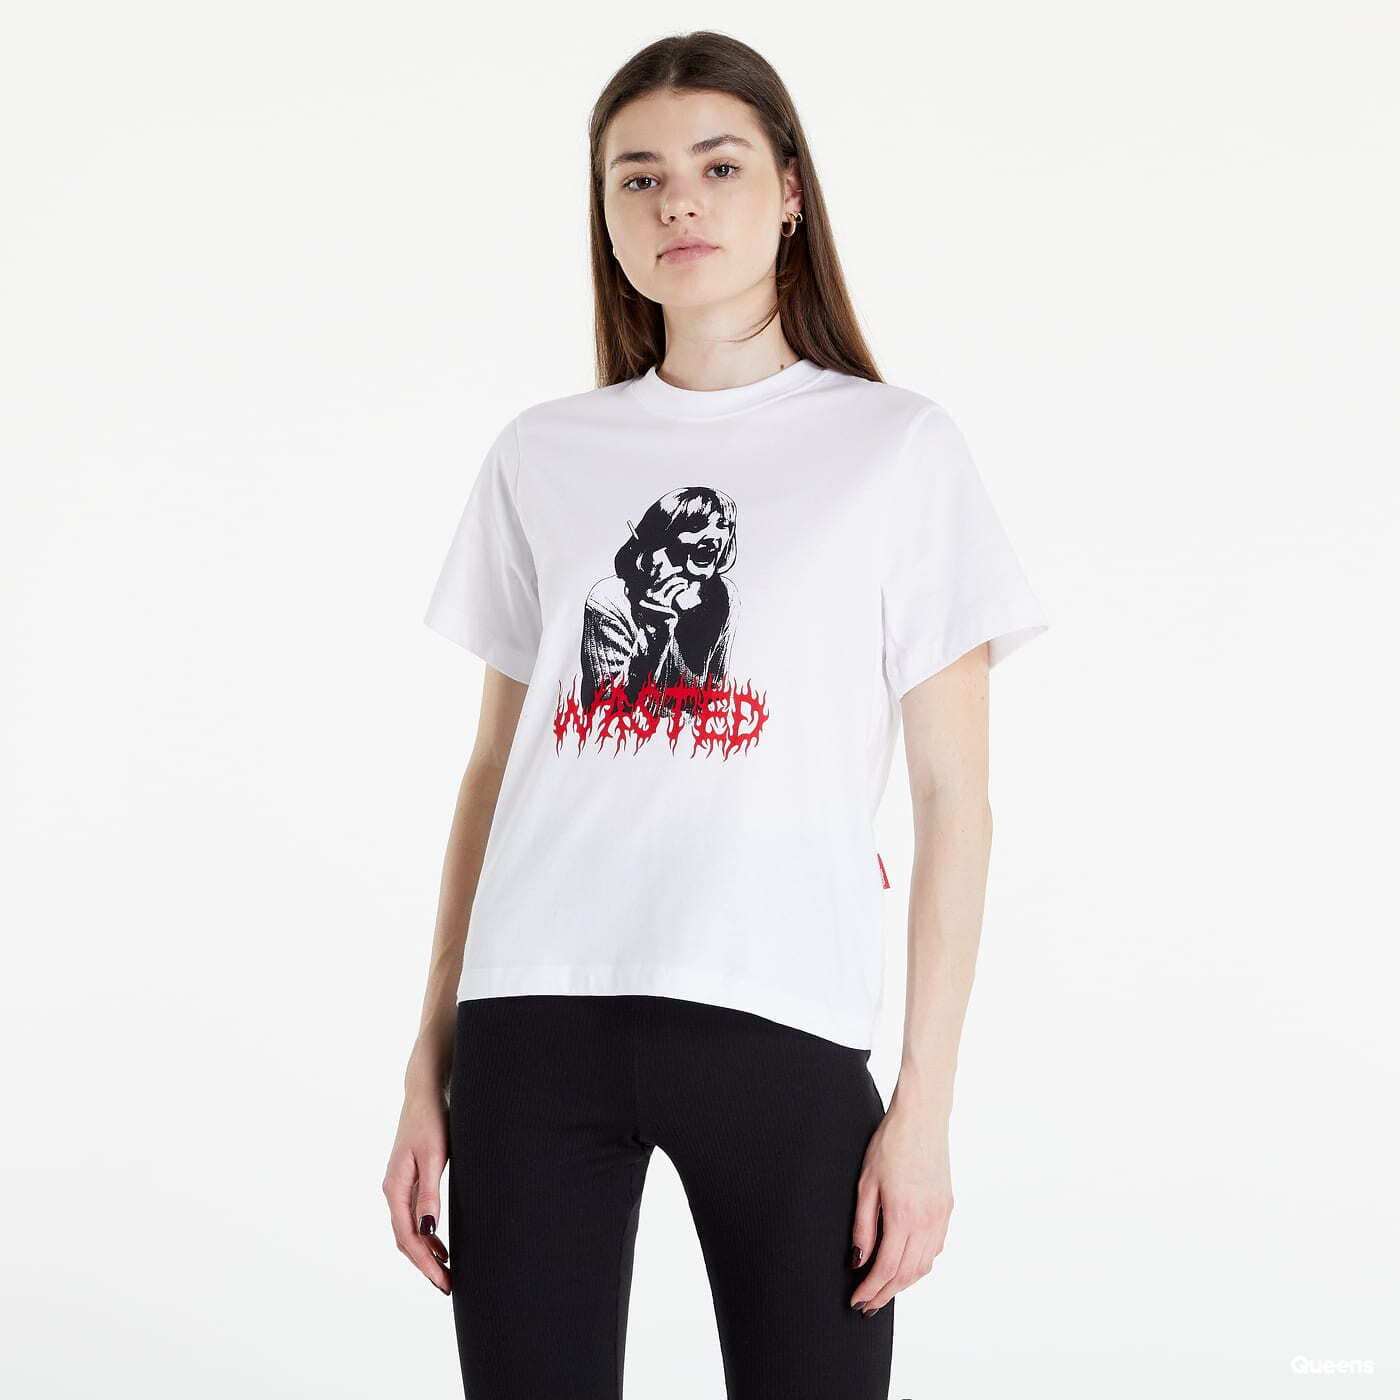 T-shirts Wasted Paris WM Scary T-shirt White